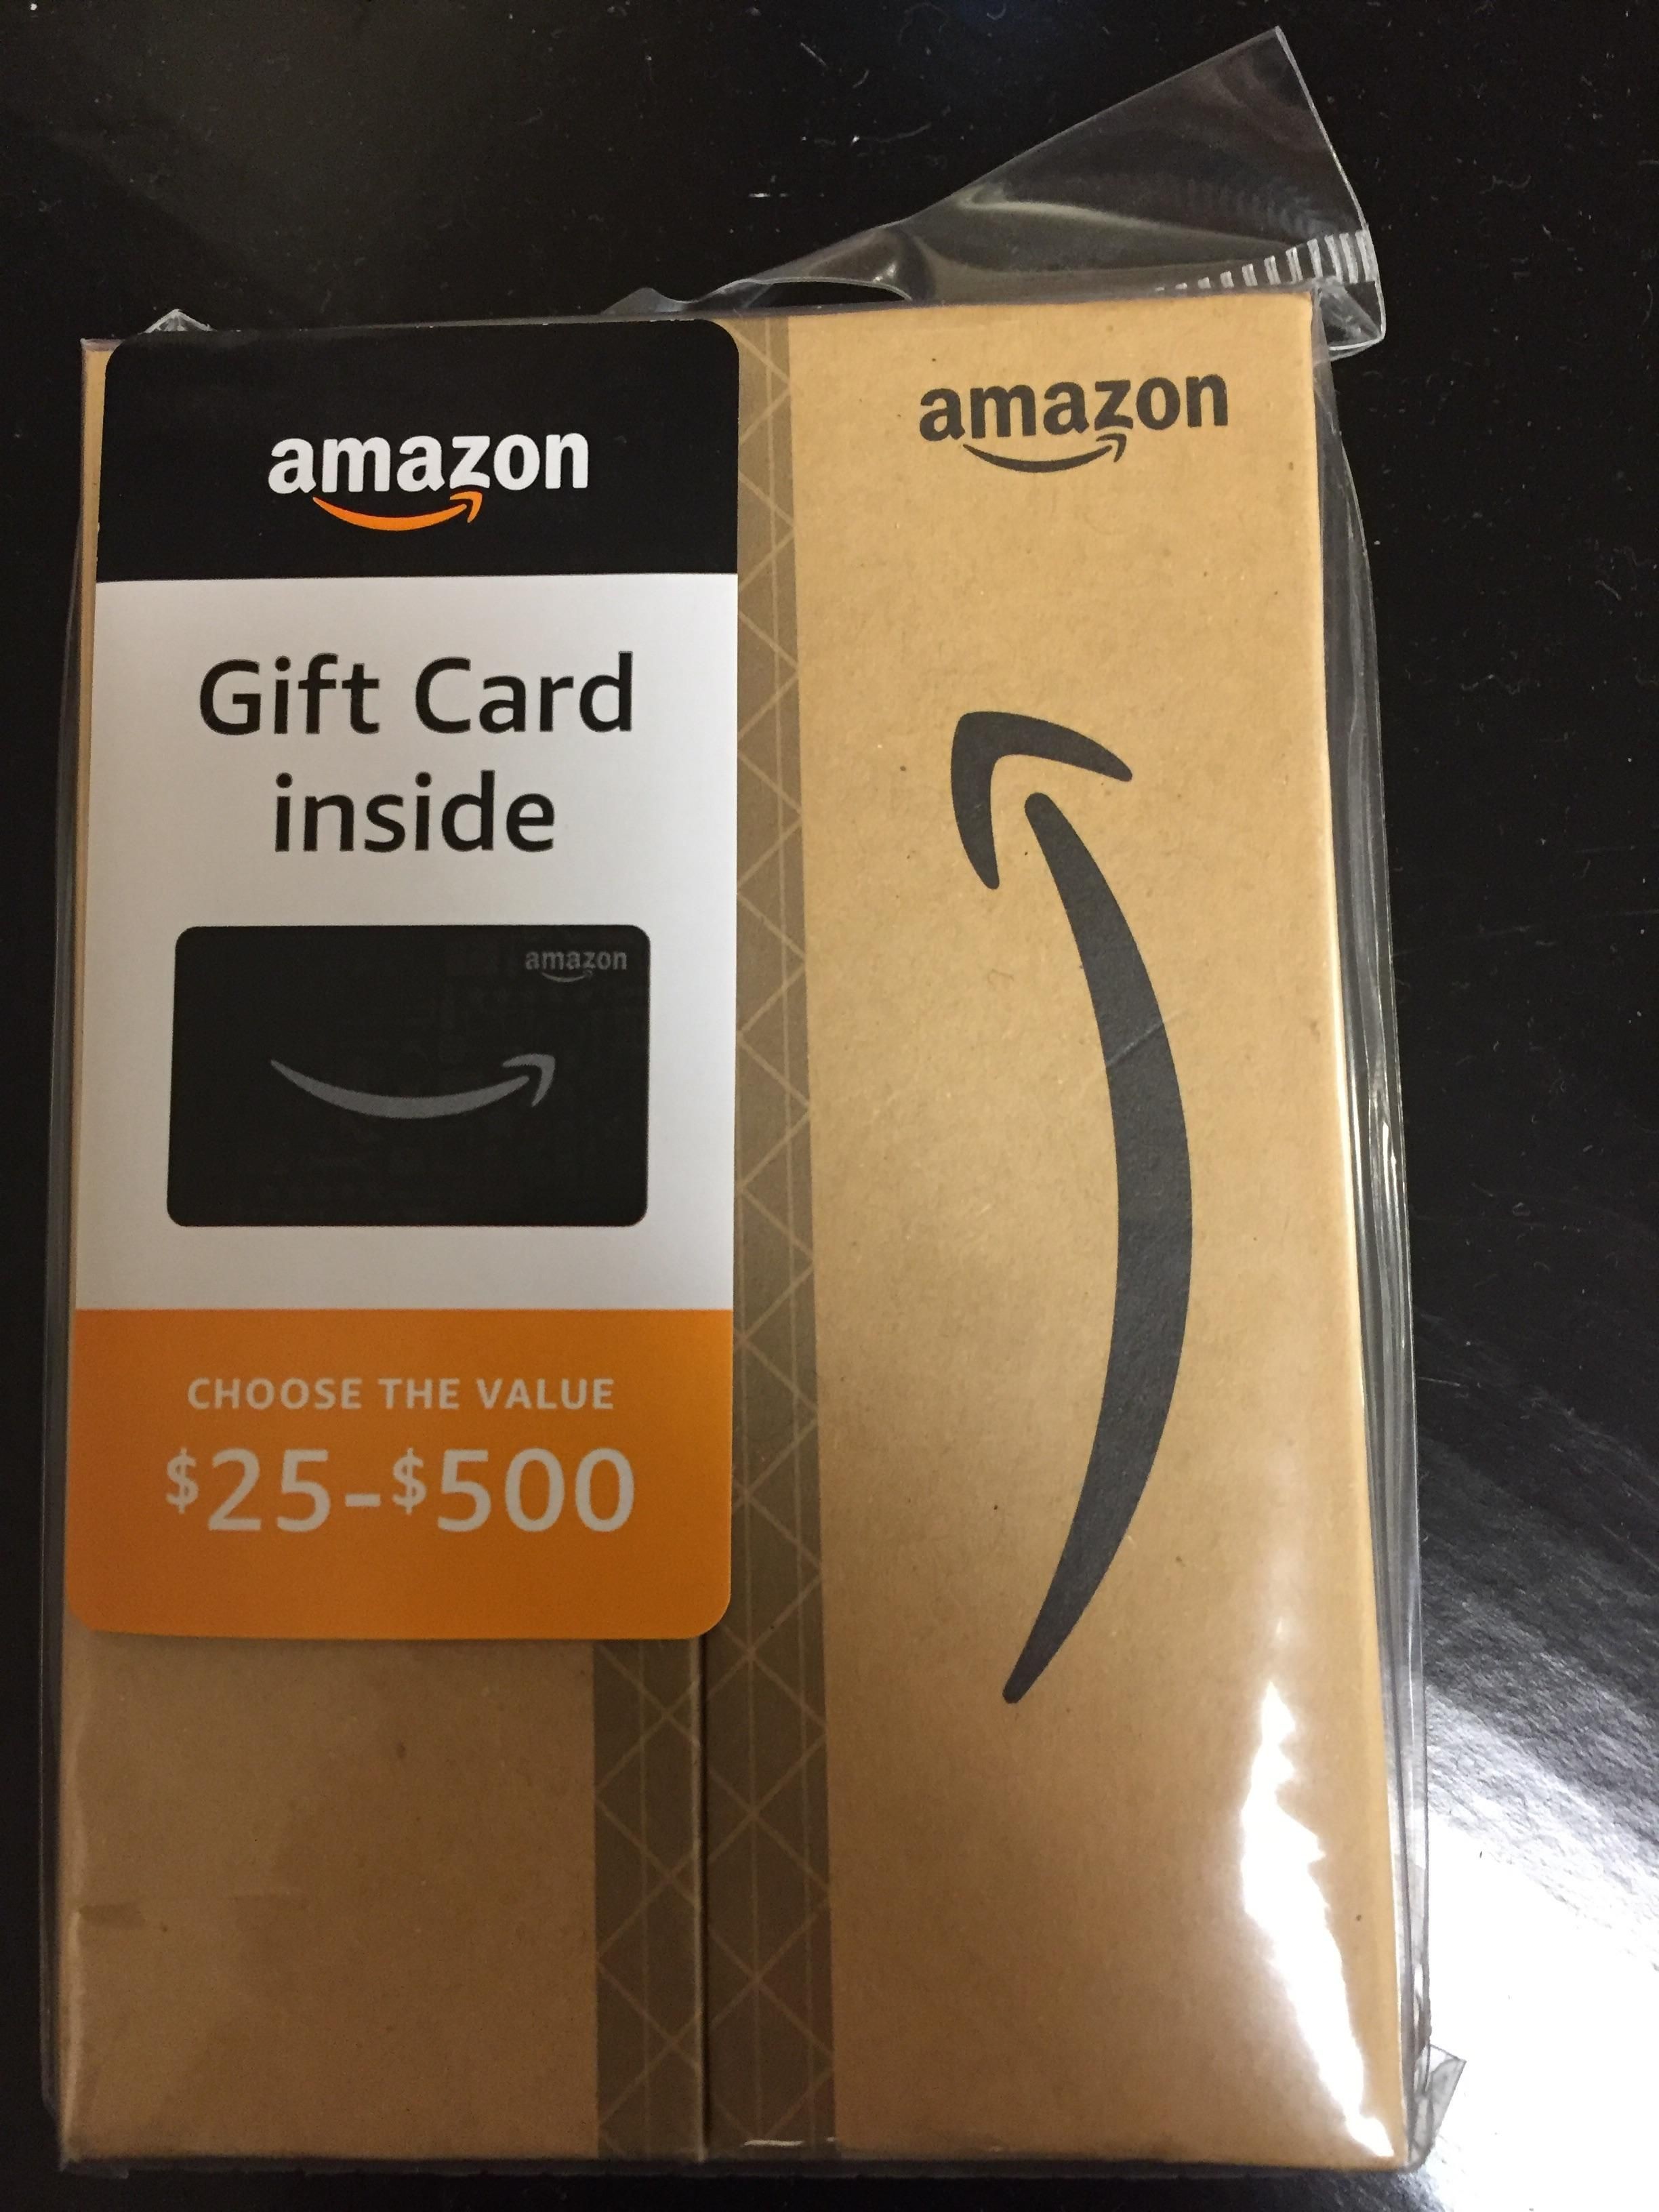 Amazon Papercraft Gift Card Box Designed to Look Like An Amazon Package